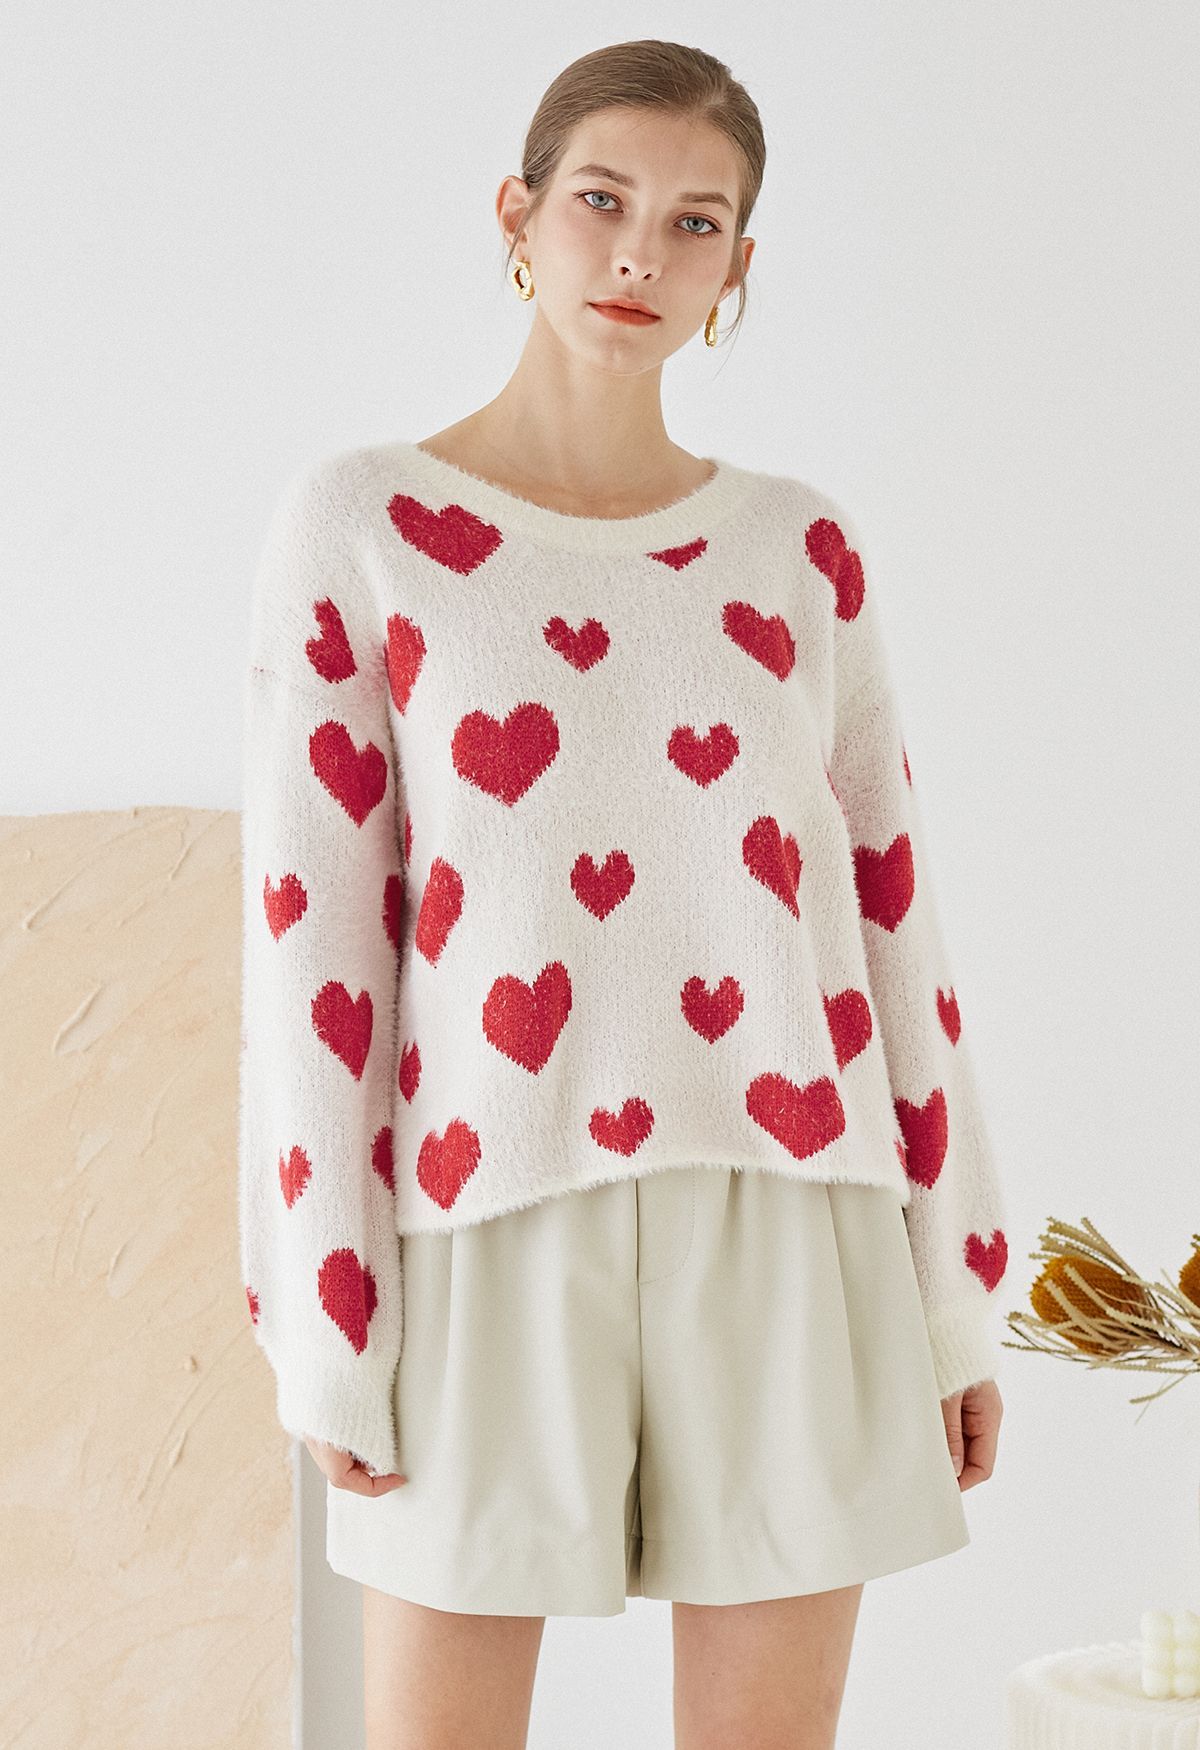 Fuzzy Contrast Heart Knit Sweater in Ivory | Chicwish